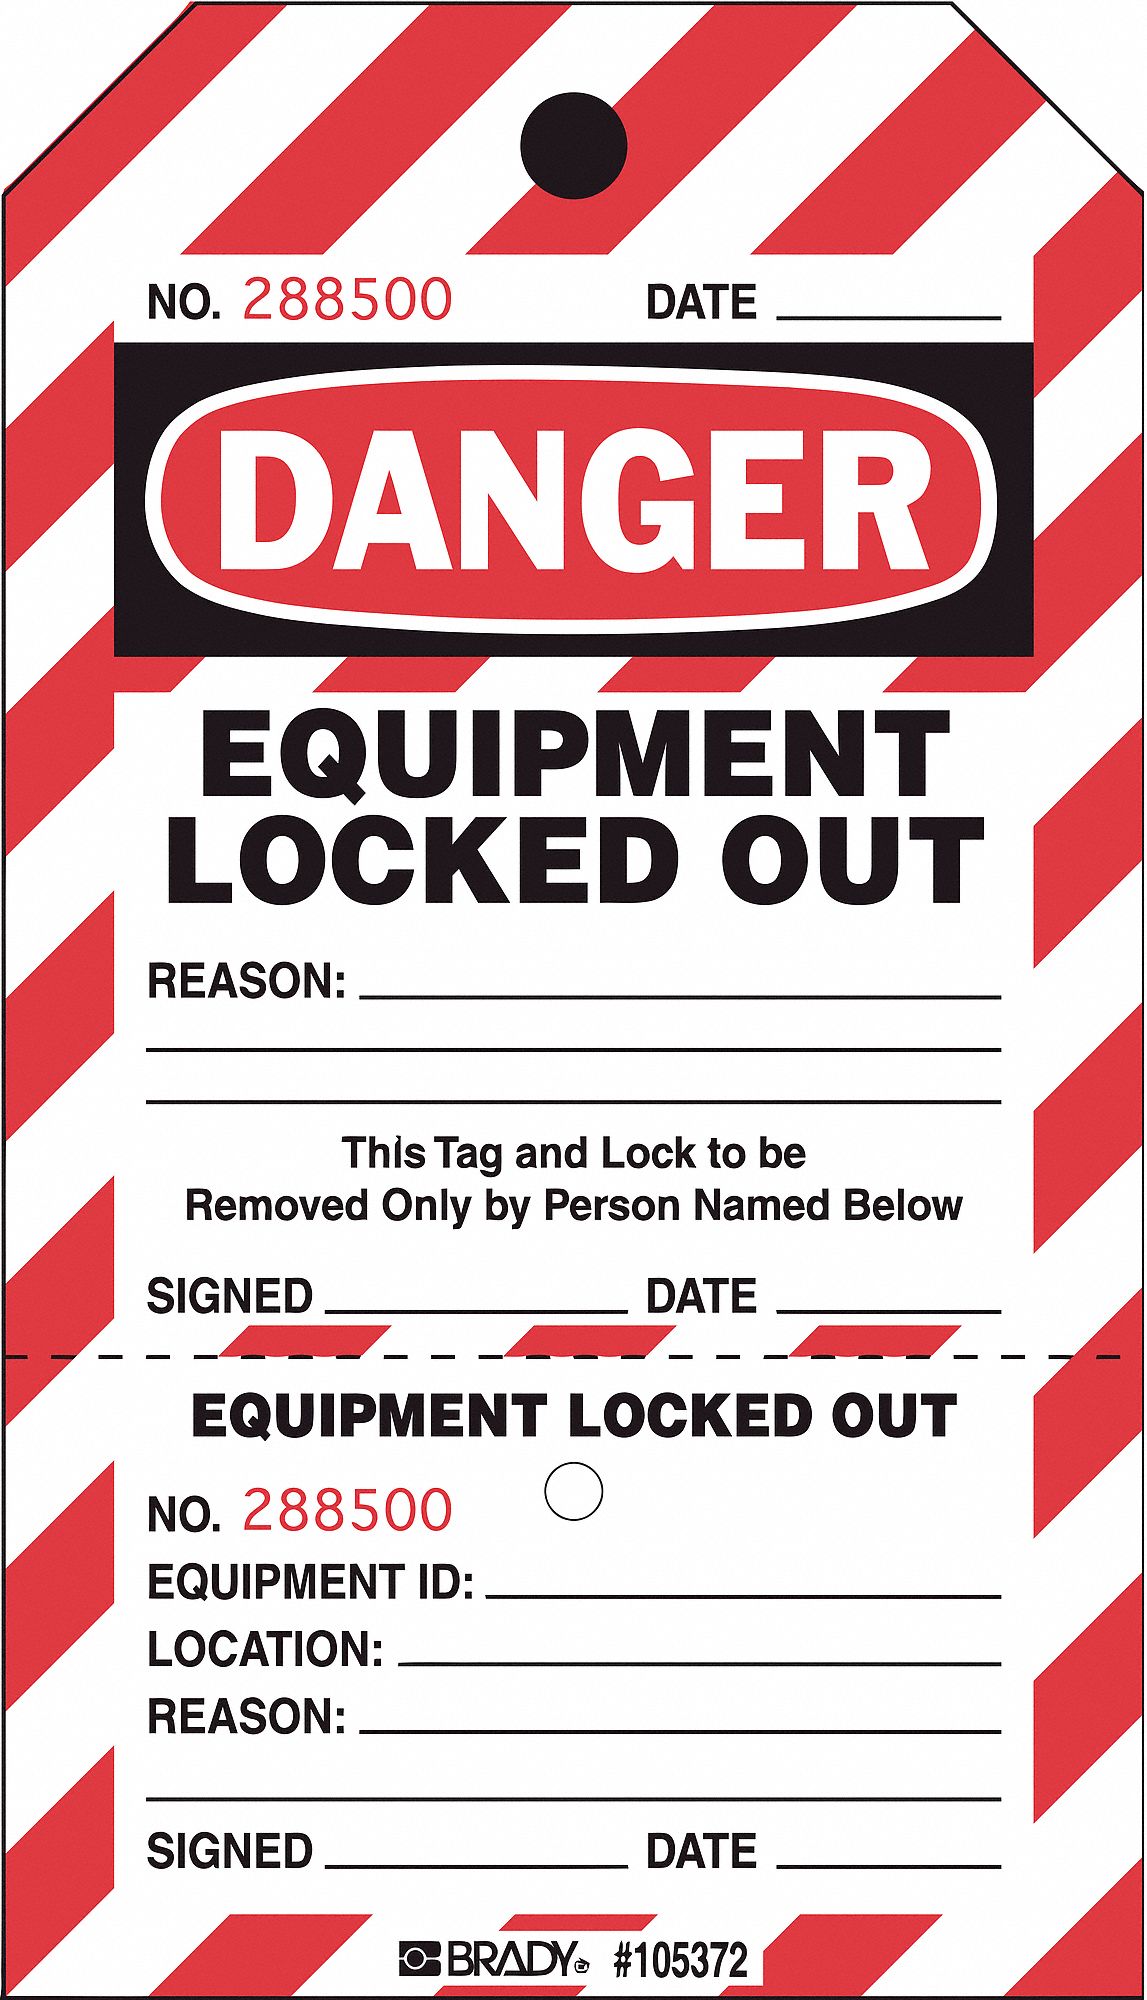 PlasticEquipment Locked Out, Danger Tag 7-1/2